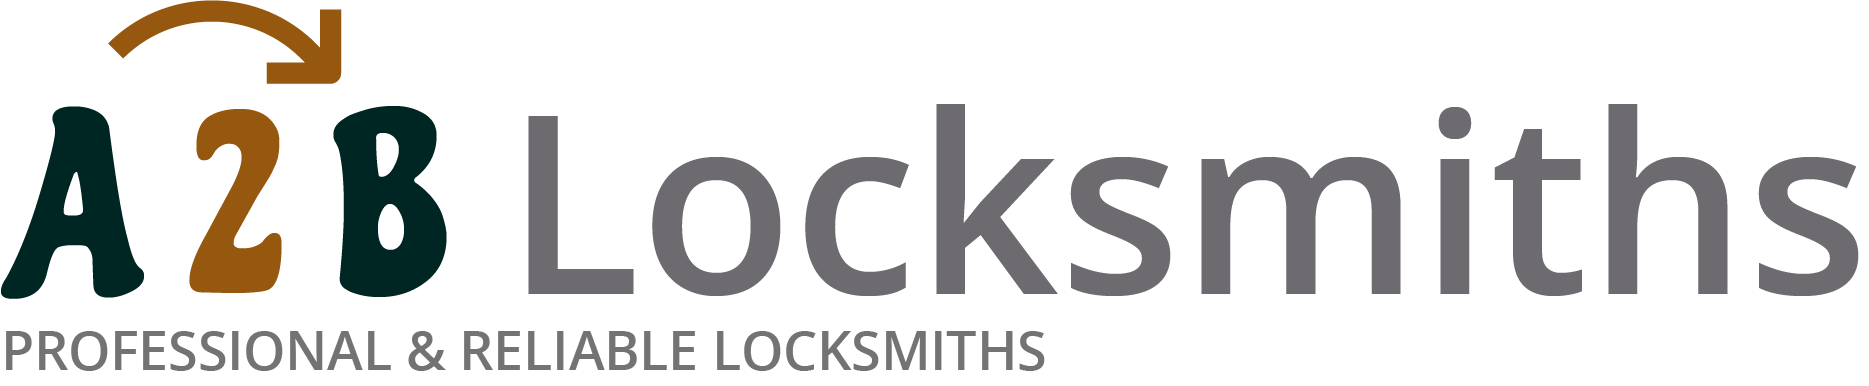 If you are locked out of house in Yiewsley, our 24/7 local emergency locksmith services can help you.